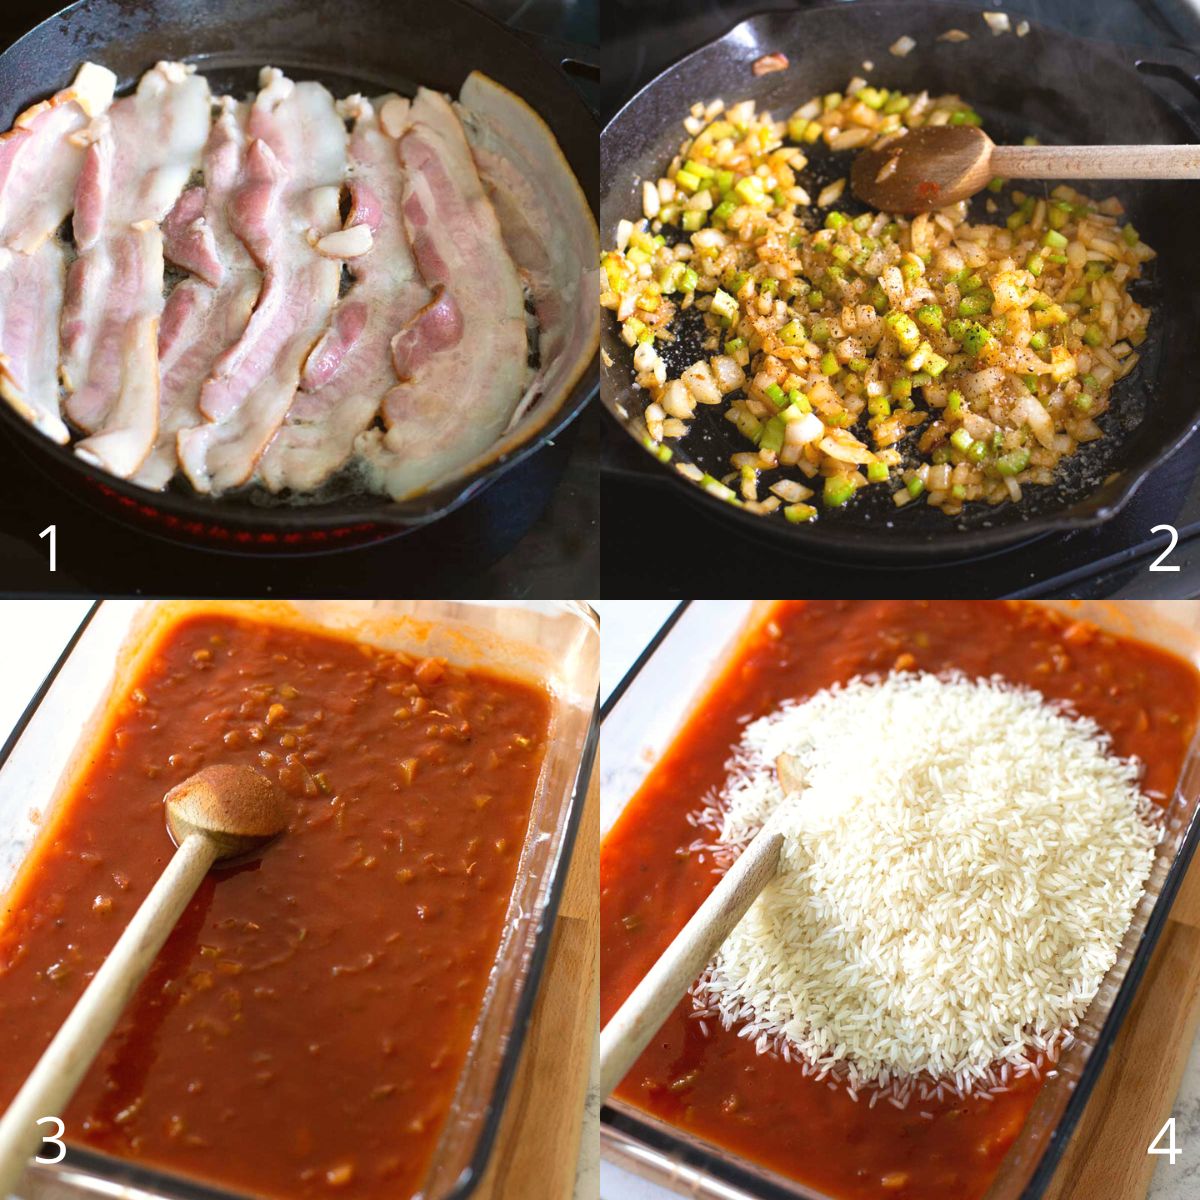 Step by step photos show how to make a baked red rice with bacon.